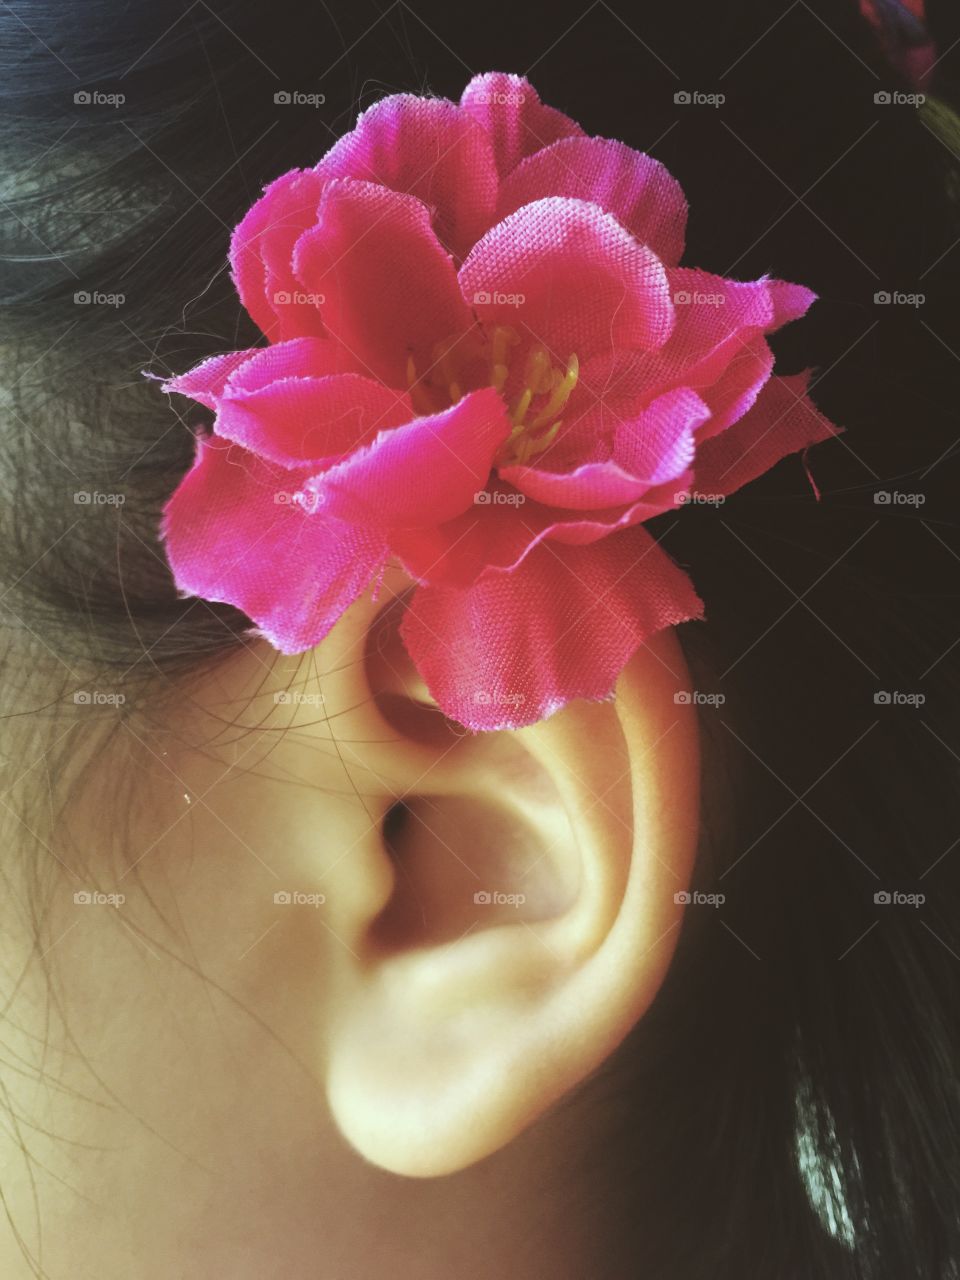 ear and hearing